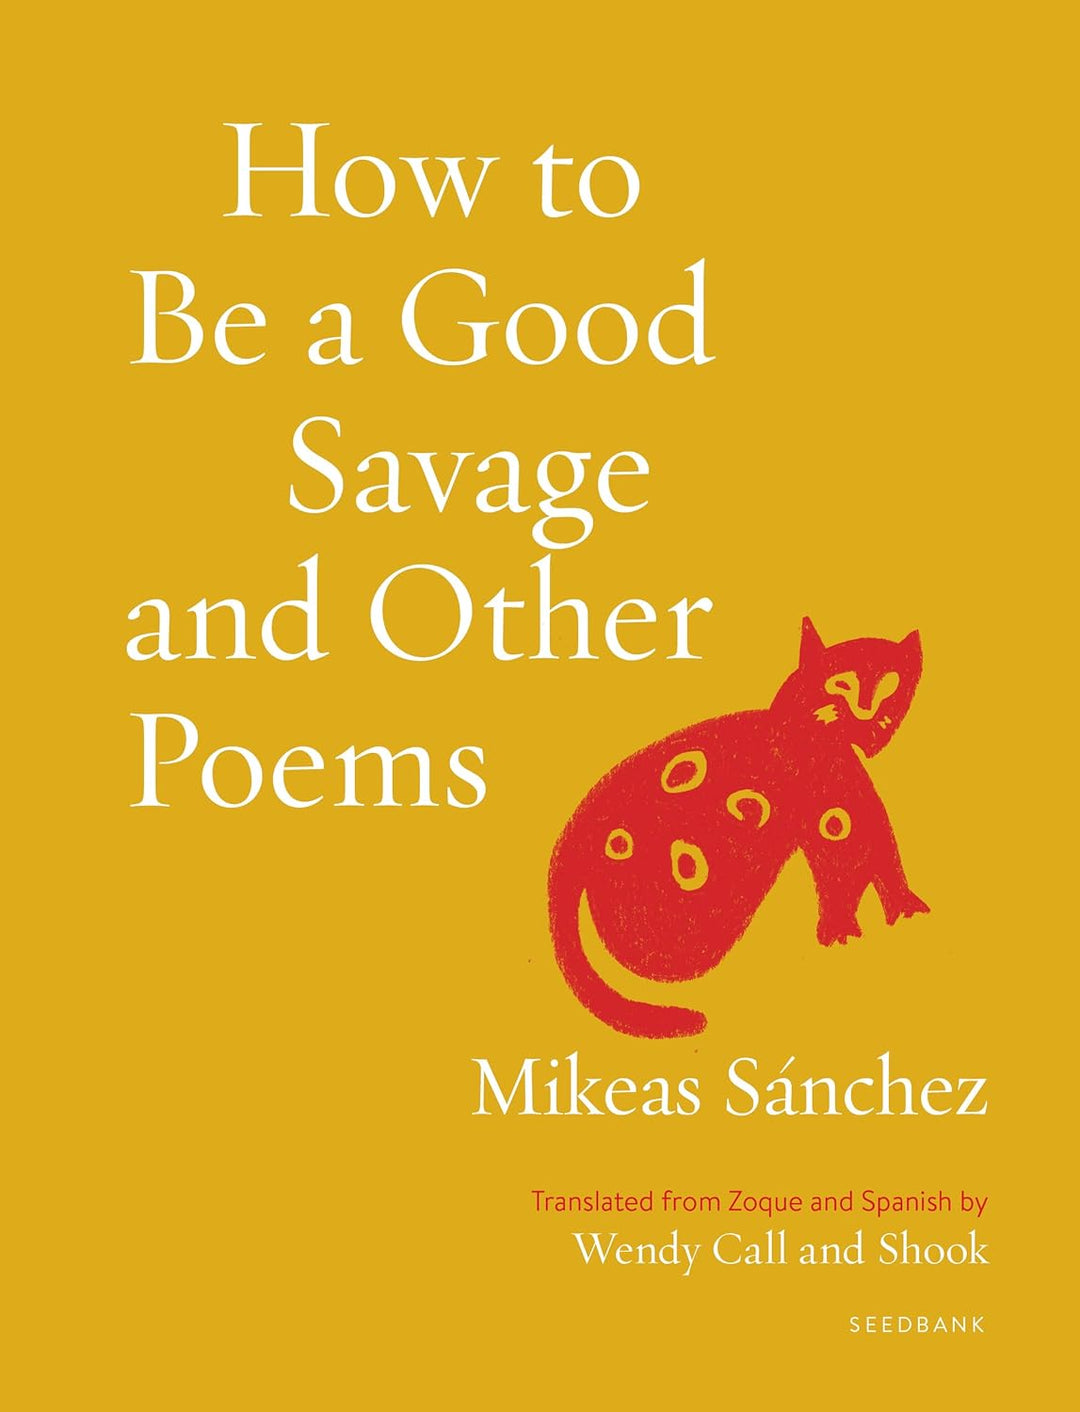 How to Be a Good Savage and Other Poems by Mikeas Sánchez, translated from Zoque and Spanish by Wendy Call and Shook